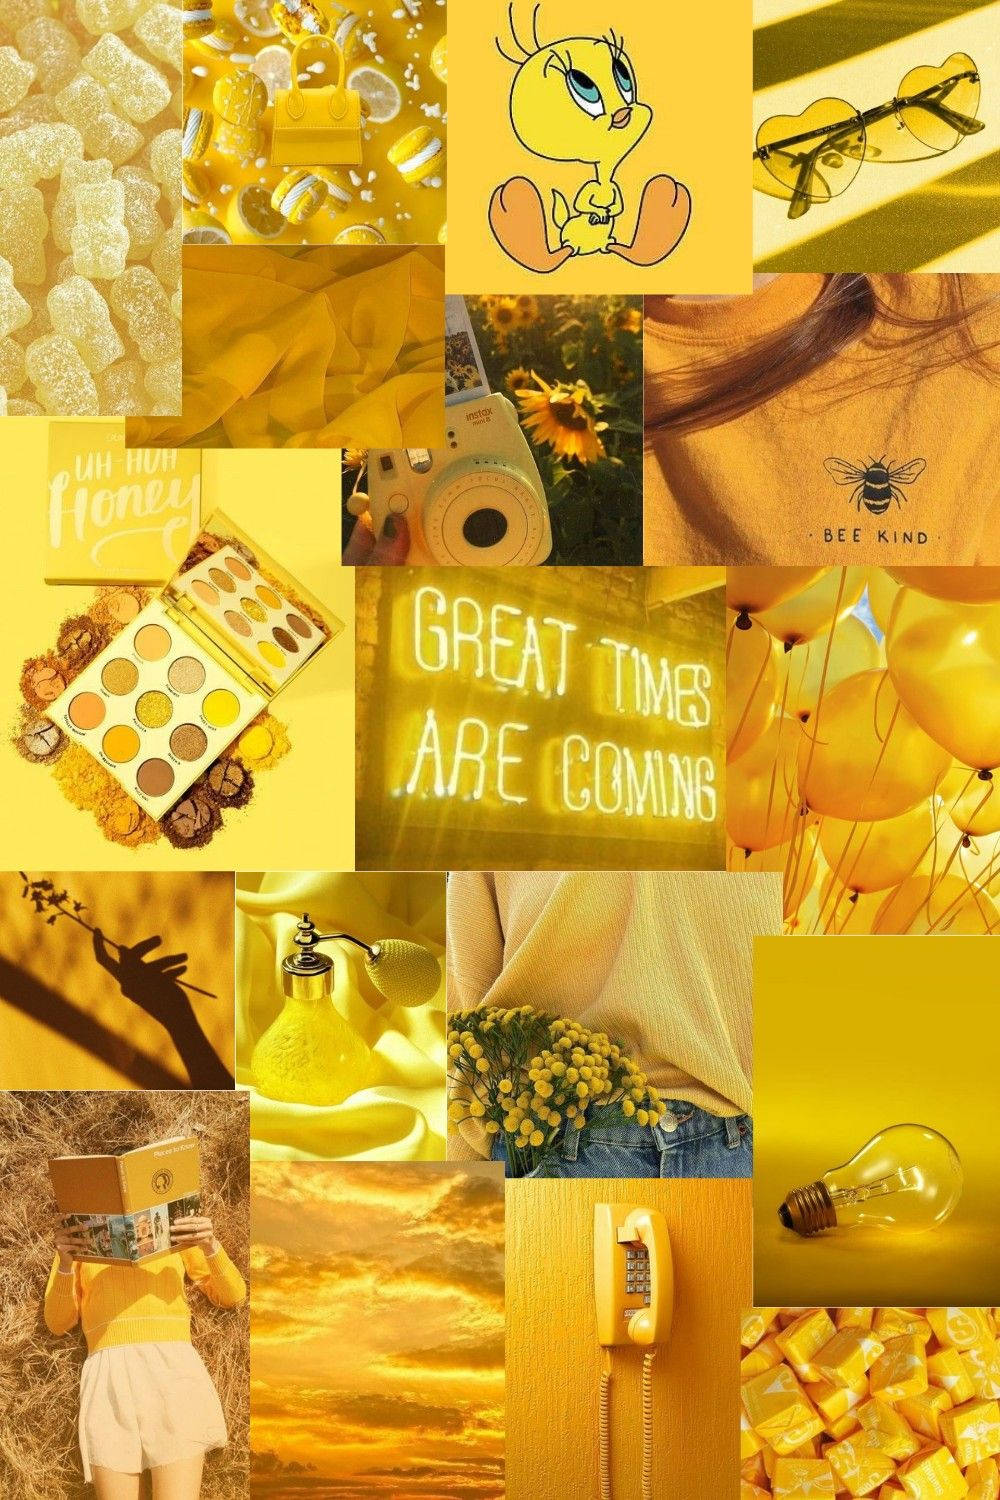 Brighten Up Your Day with This Happy Yellow Aesthetic Wallpaper